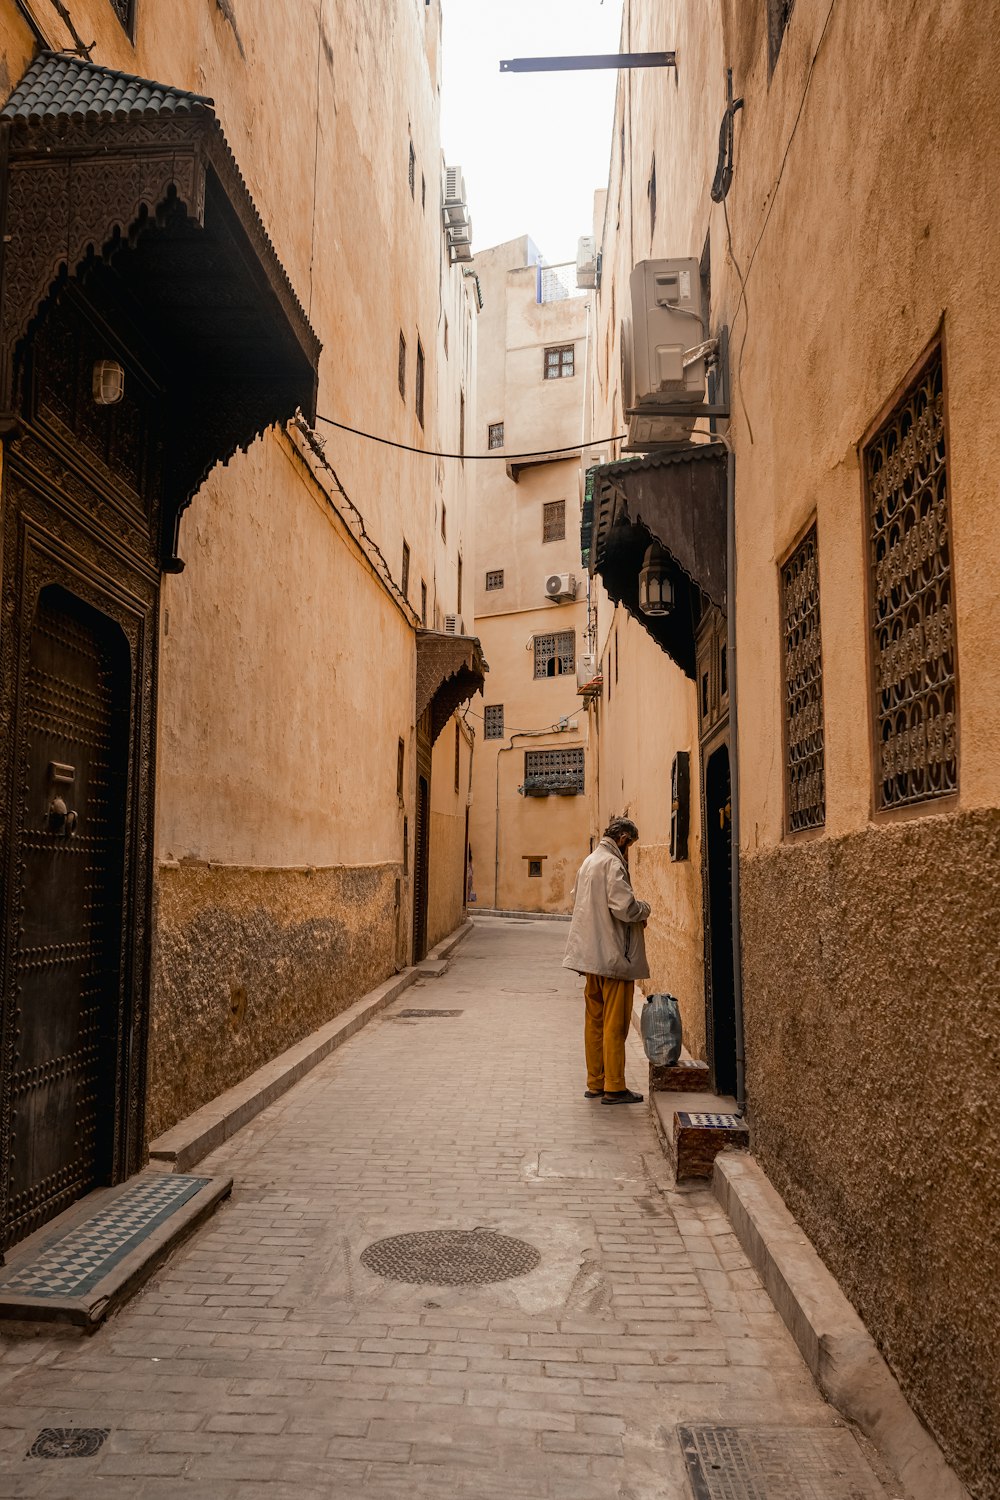 a man standing in an alley between two buildings